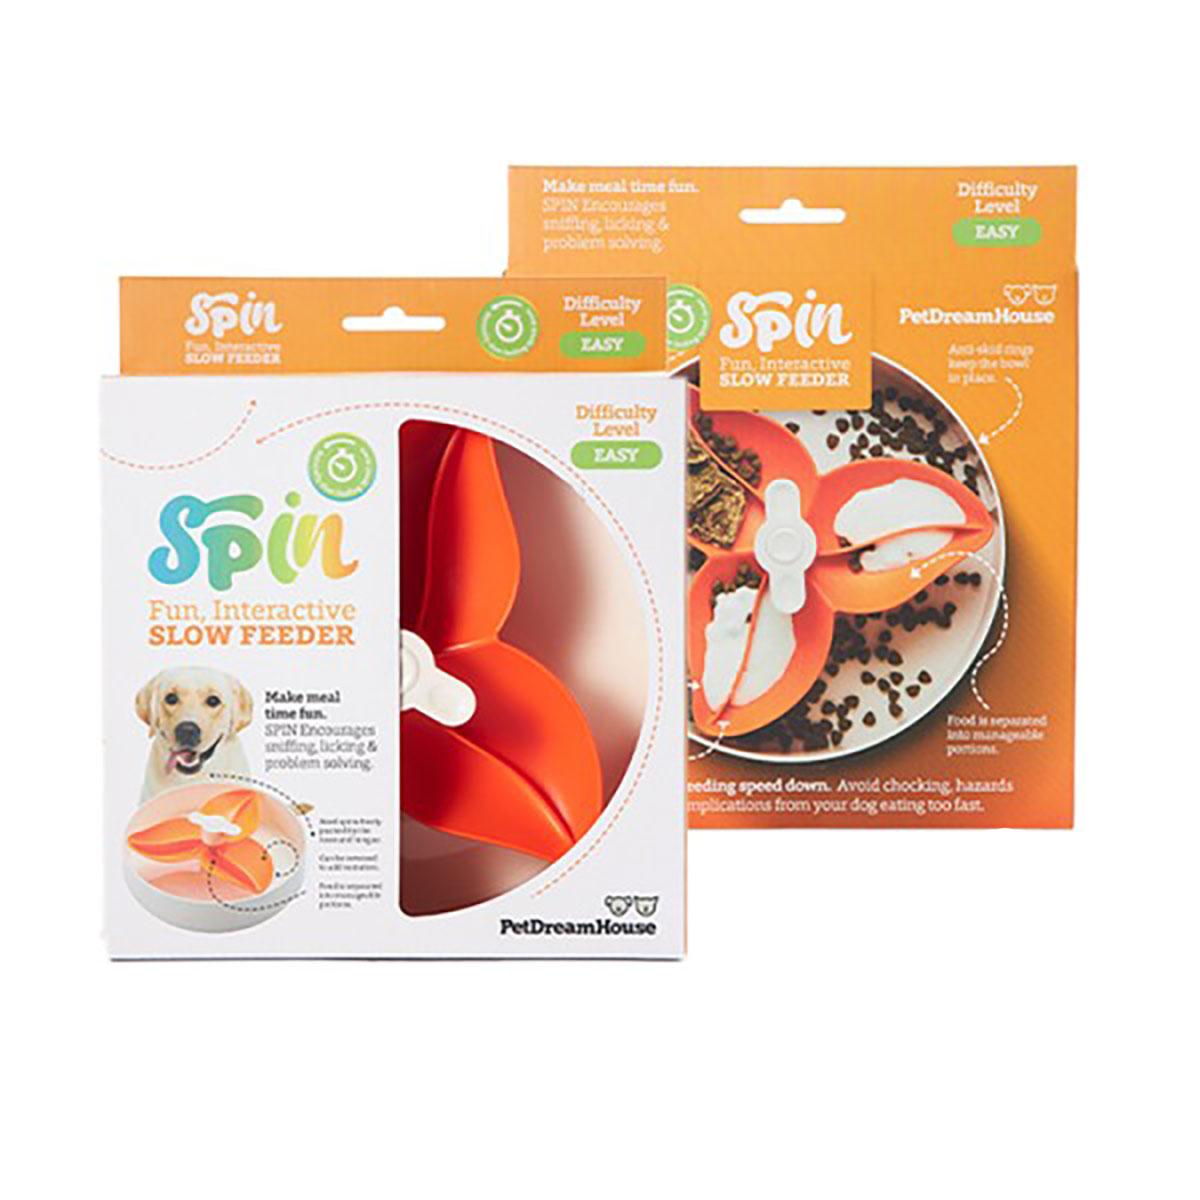 https://images.baxterboo.com/global/images/products/large/petdreamhouse-spin-interactive-slow-feeder-pet-bowl-bougainvillea-orange-5491.jpg